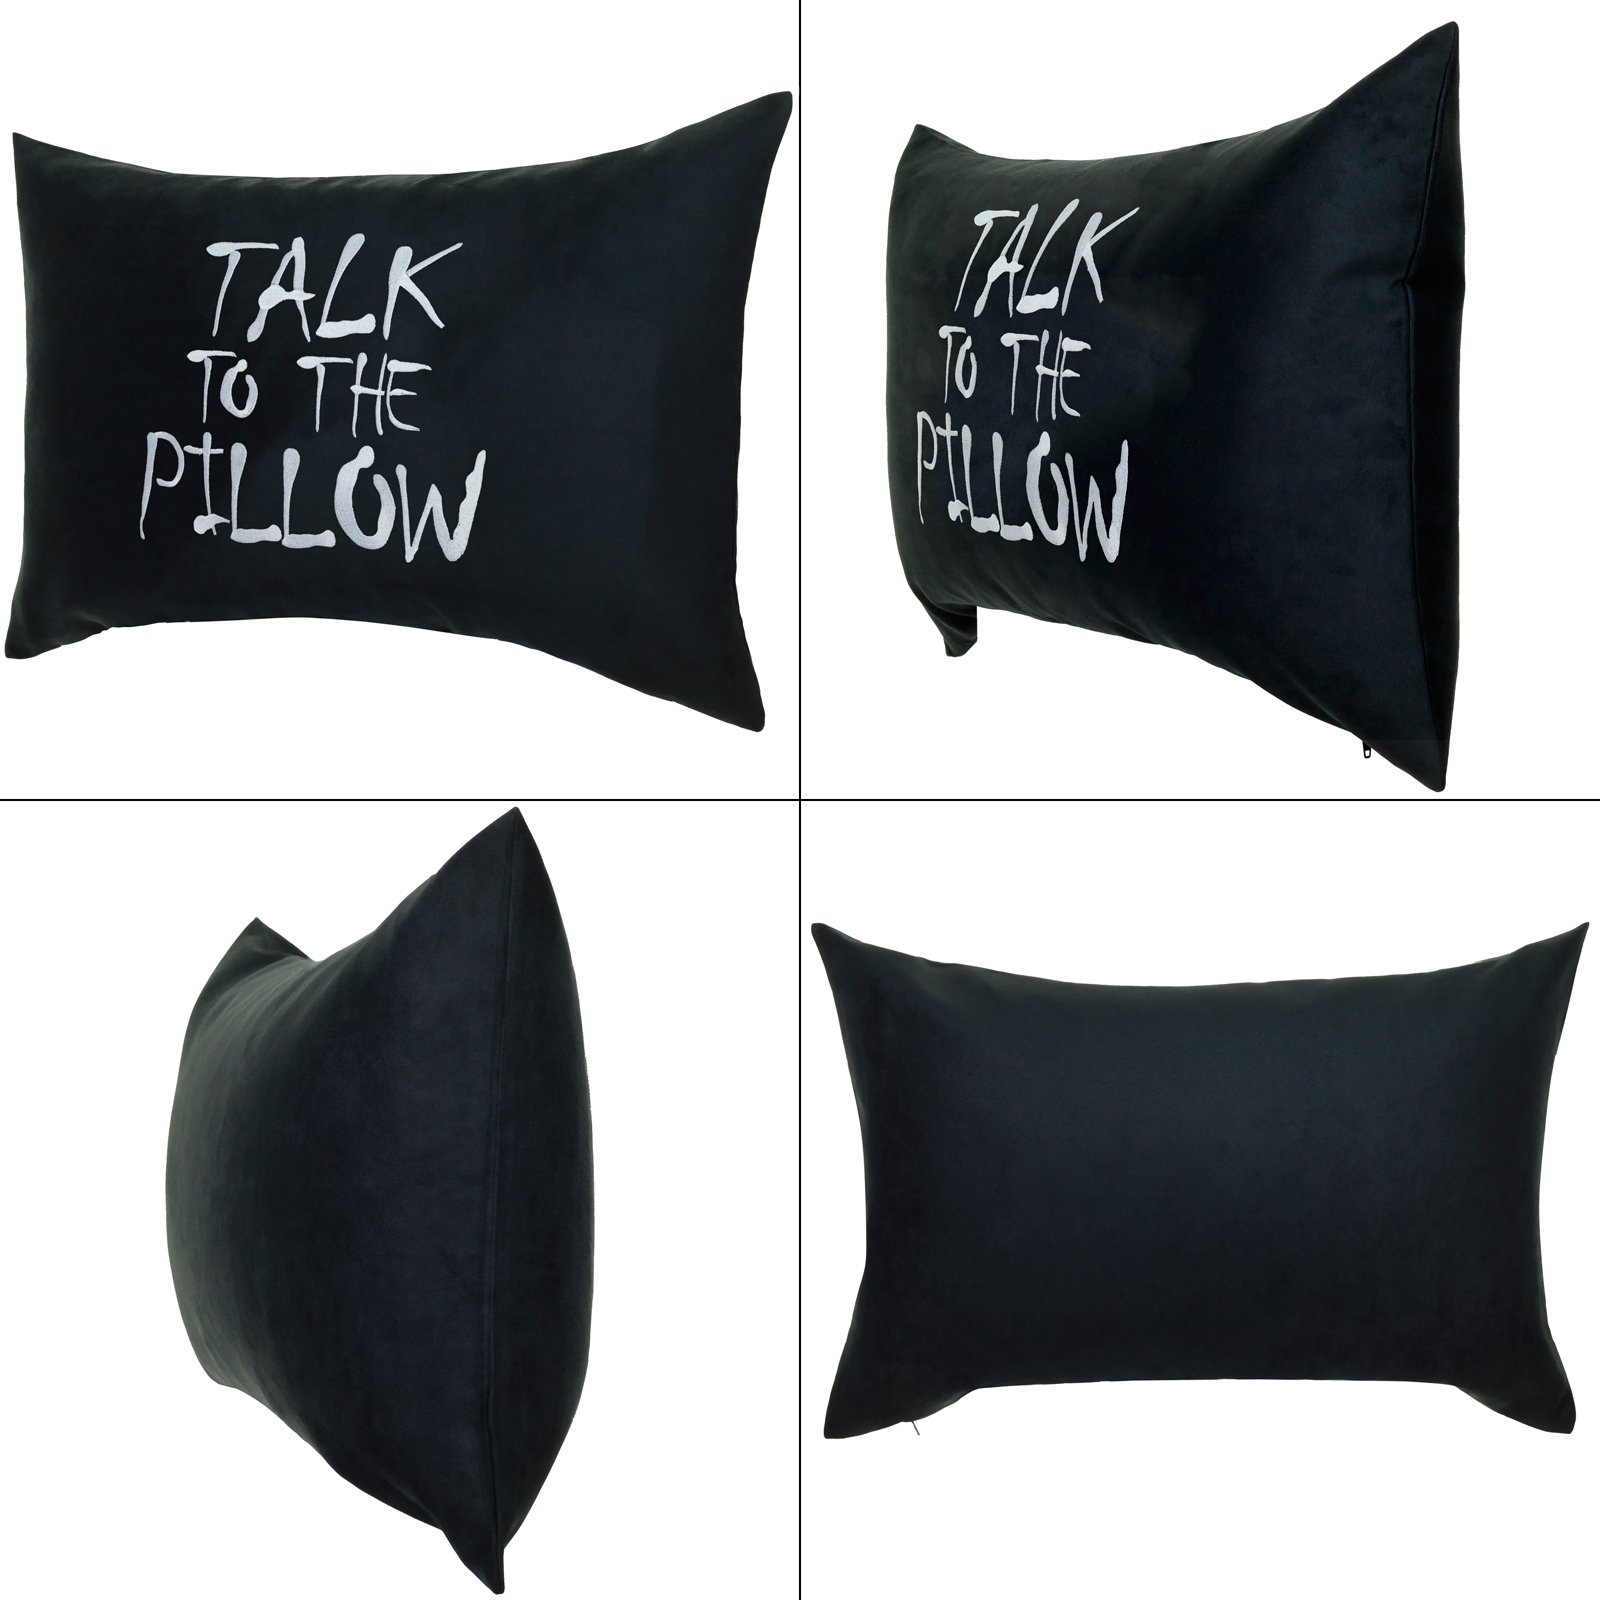 Talk to the Pillow